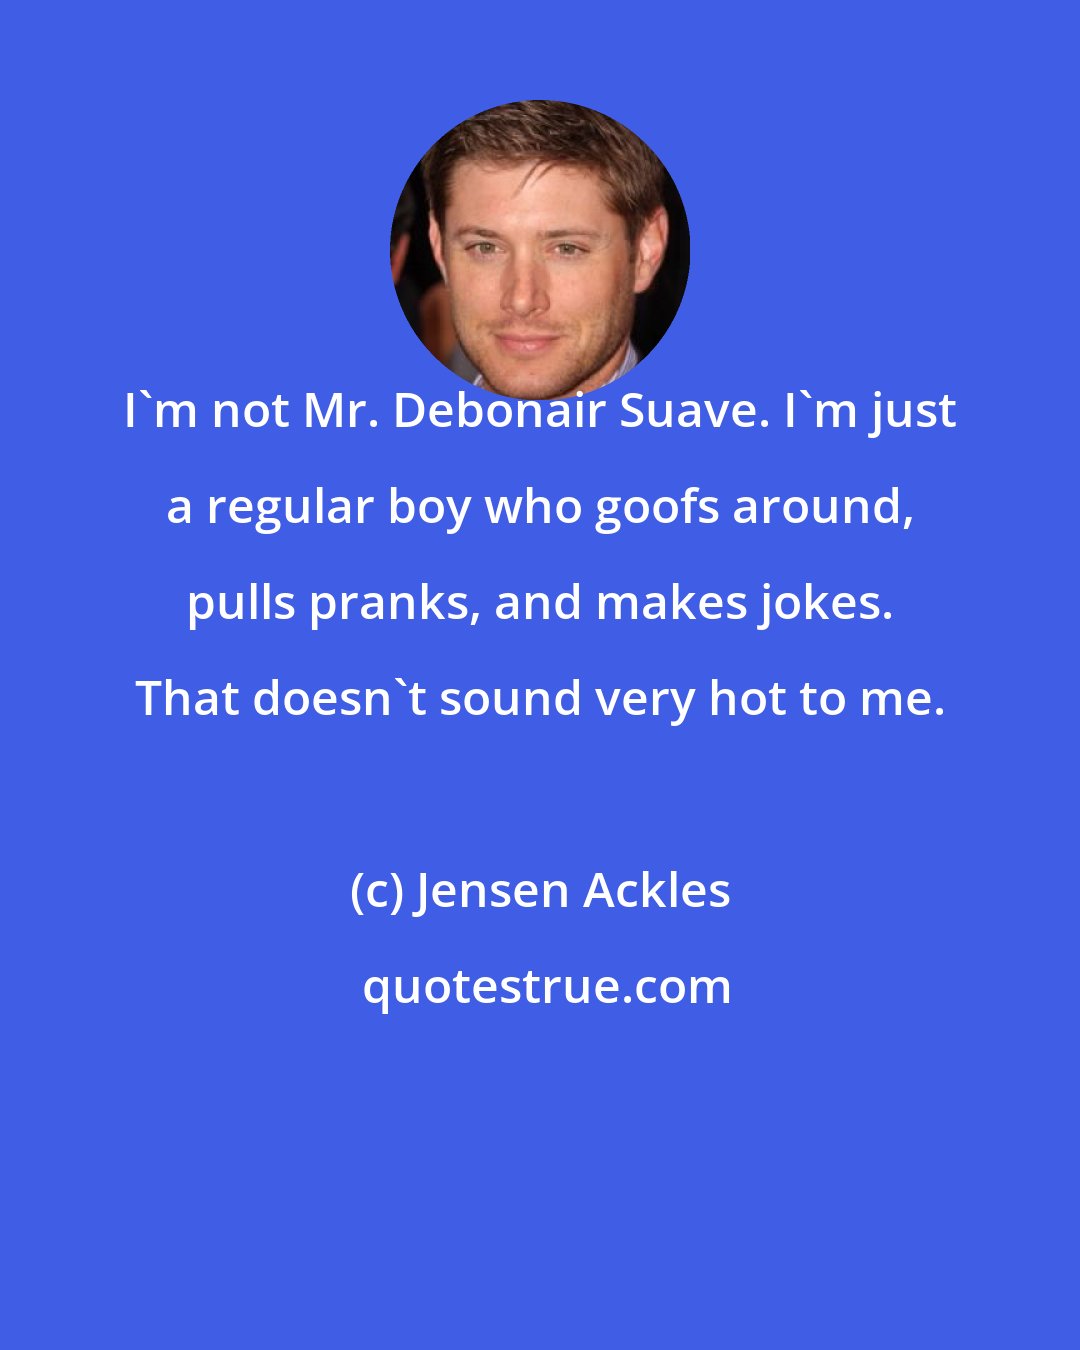 Jensen Ackles: I'm not Mr. Debonair Suave. I'm just a regular boy who goofs around, pulls pranks, and makes jokes. That doesn't sound very hot to me.